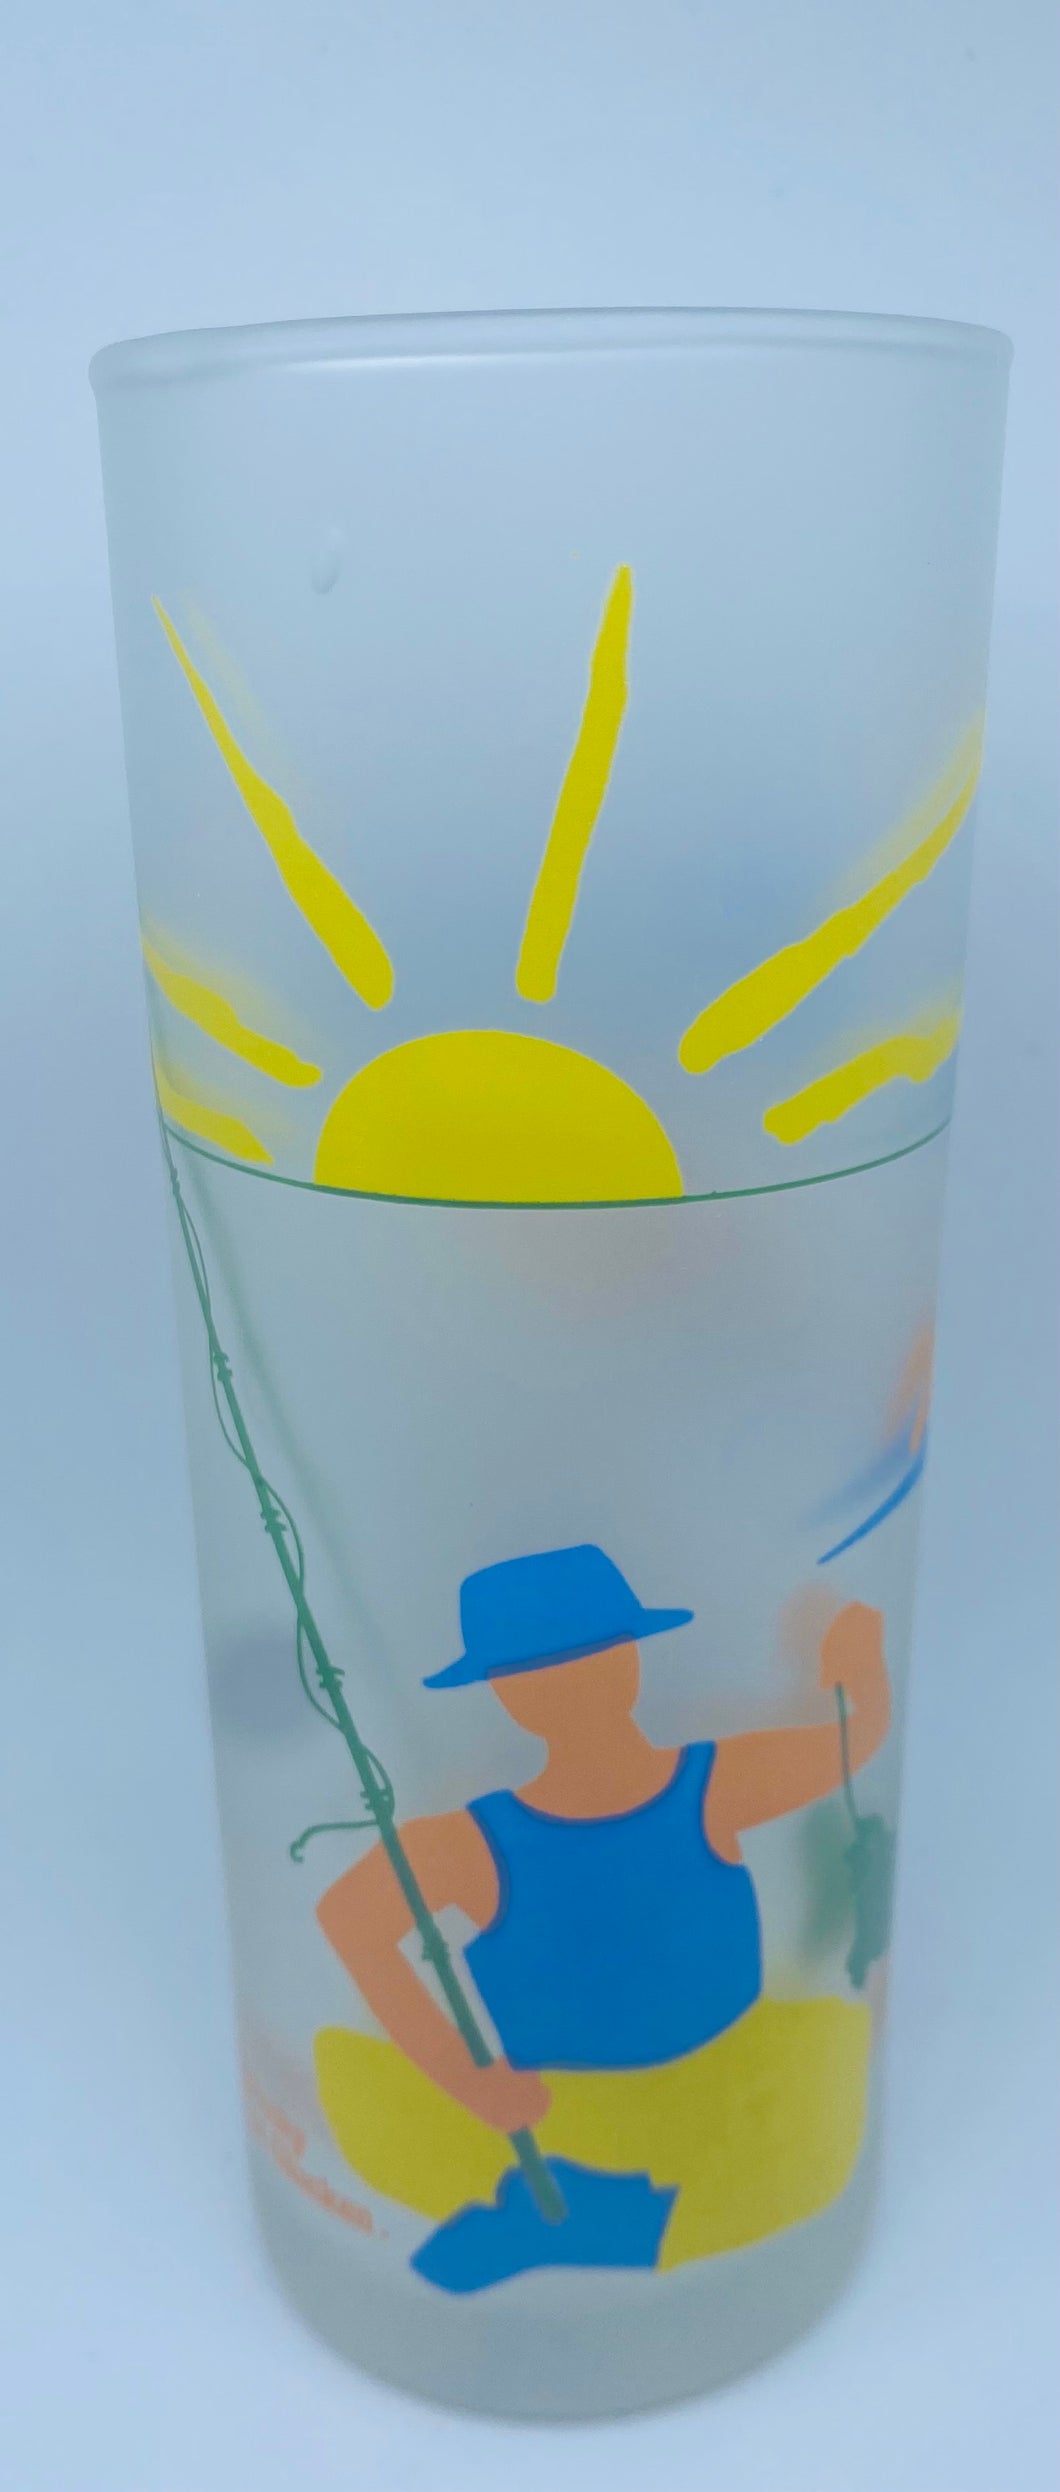 1980s KFC Frosted Glass